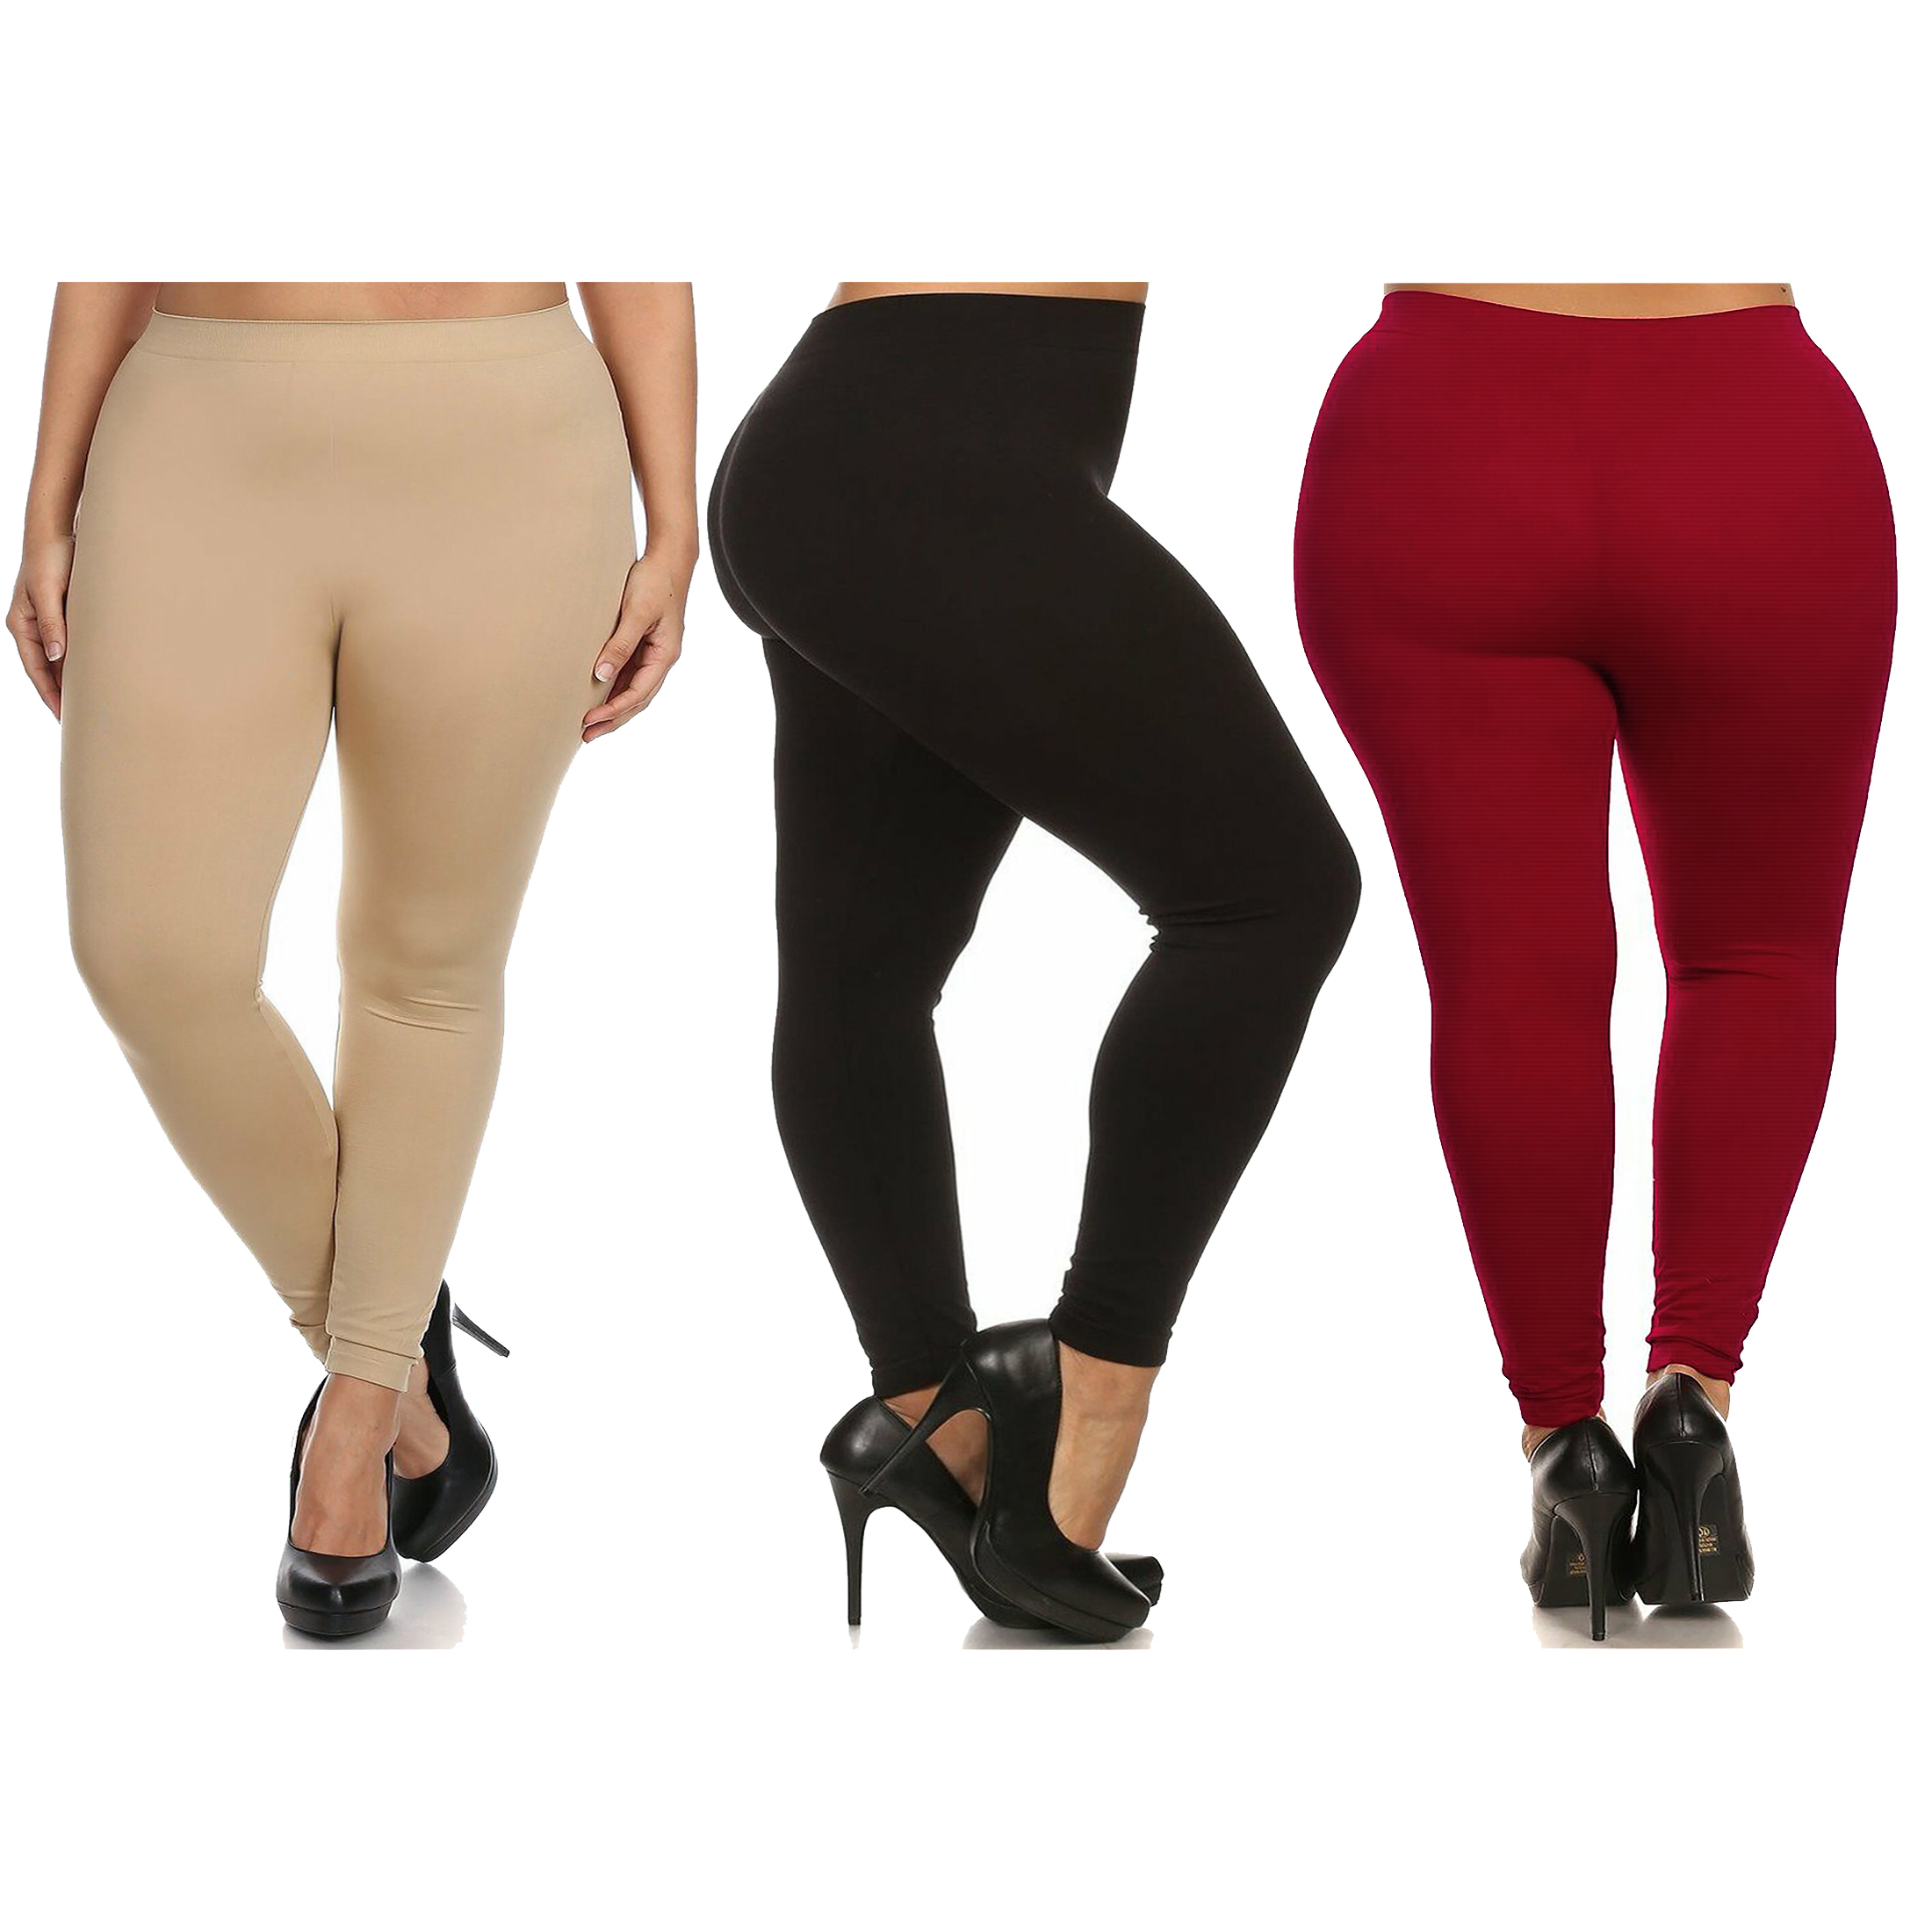 Multi-Pack: Plus Size Women's Casual Ultra-Soft Workout Yoga Leggings - 2 Pack